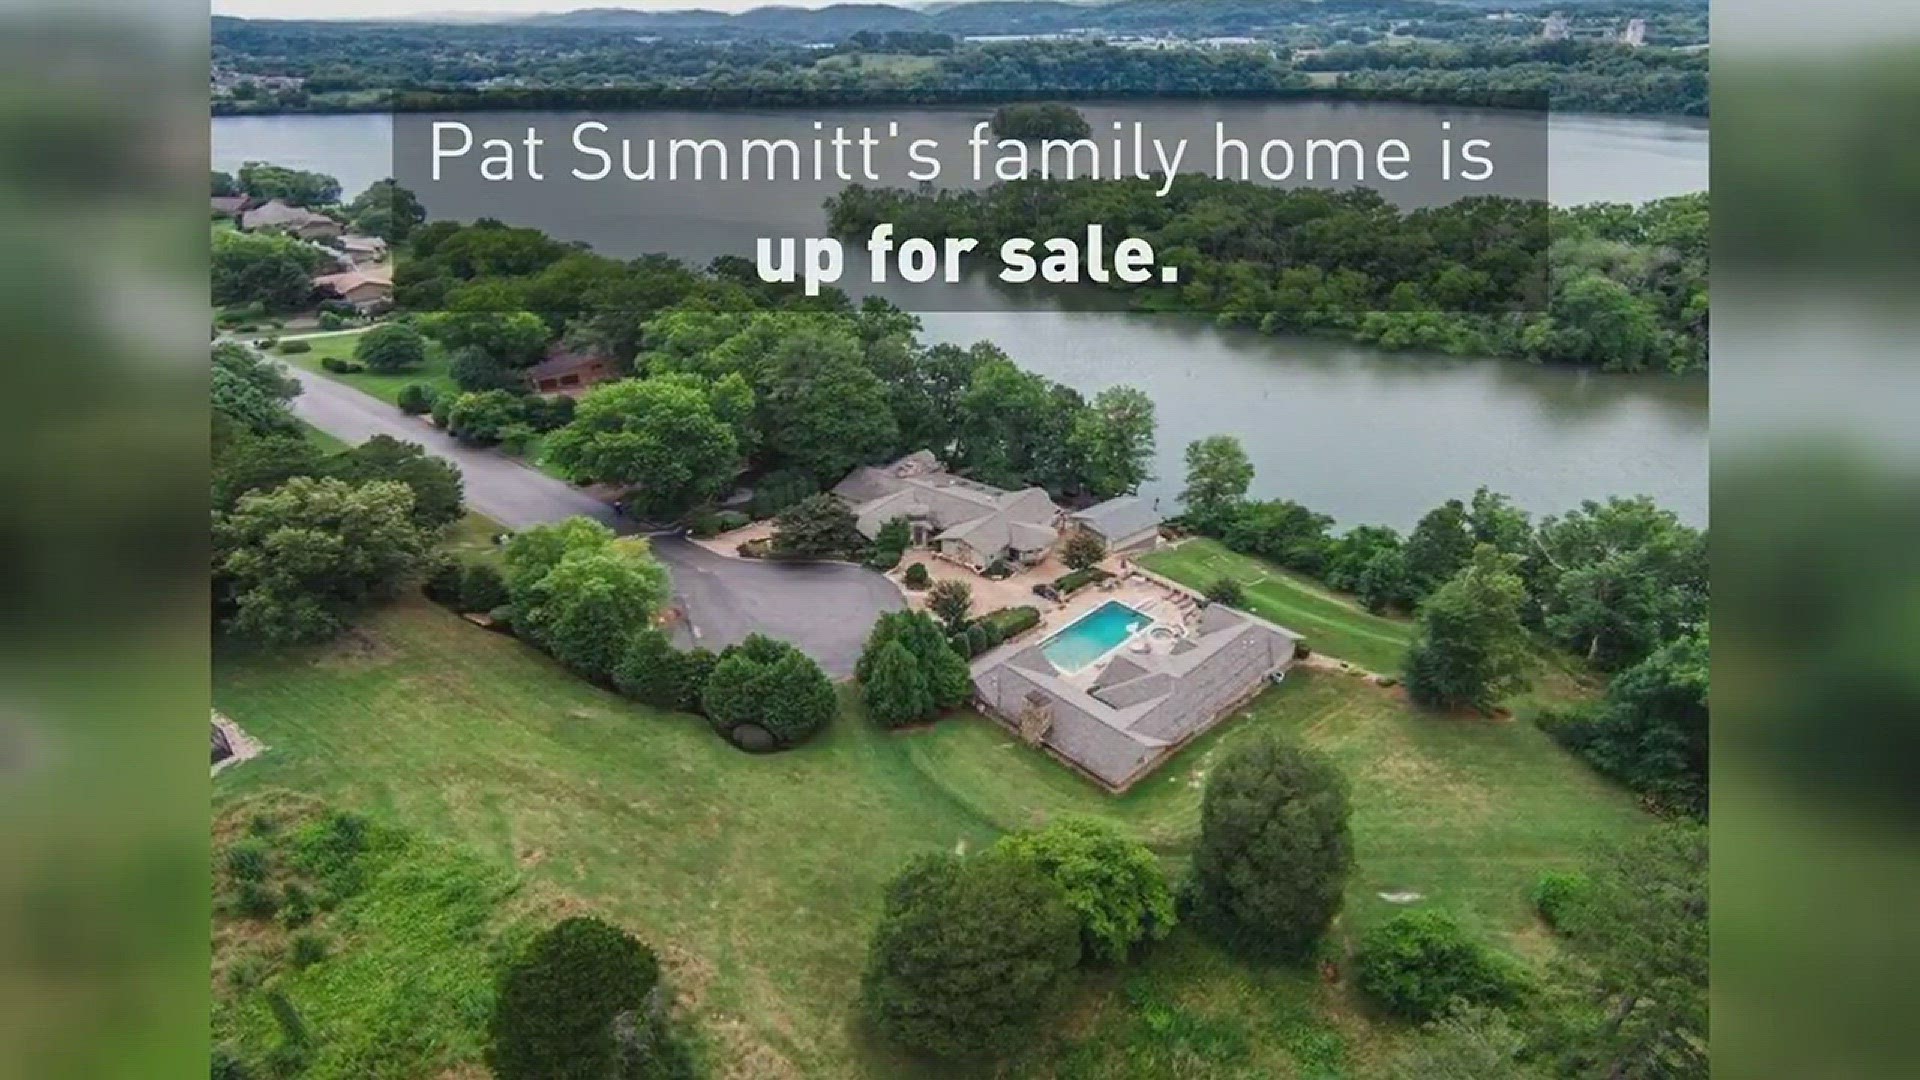 The sprawling home where the late legendary basketball coach Pat Summitt lived and entertained is listed for sale at $1.225 million.